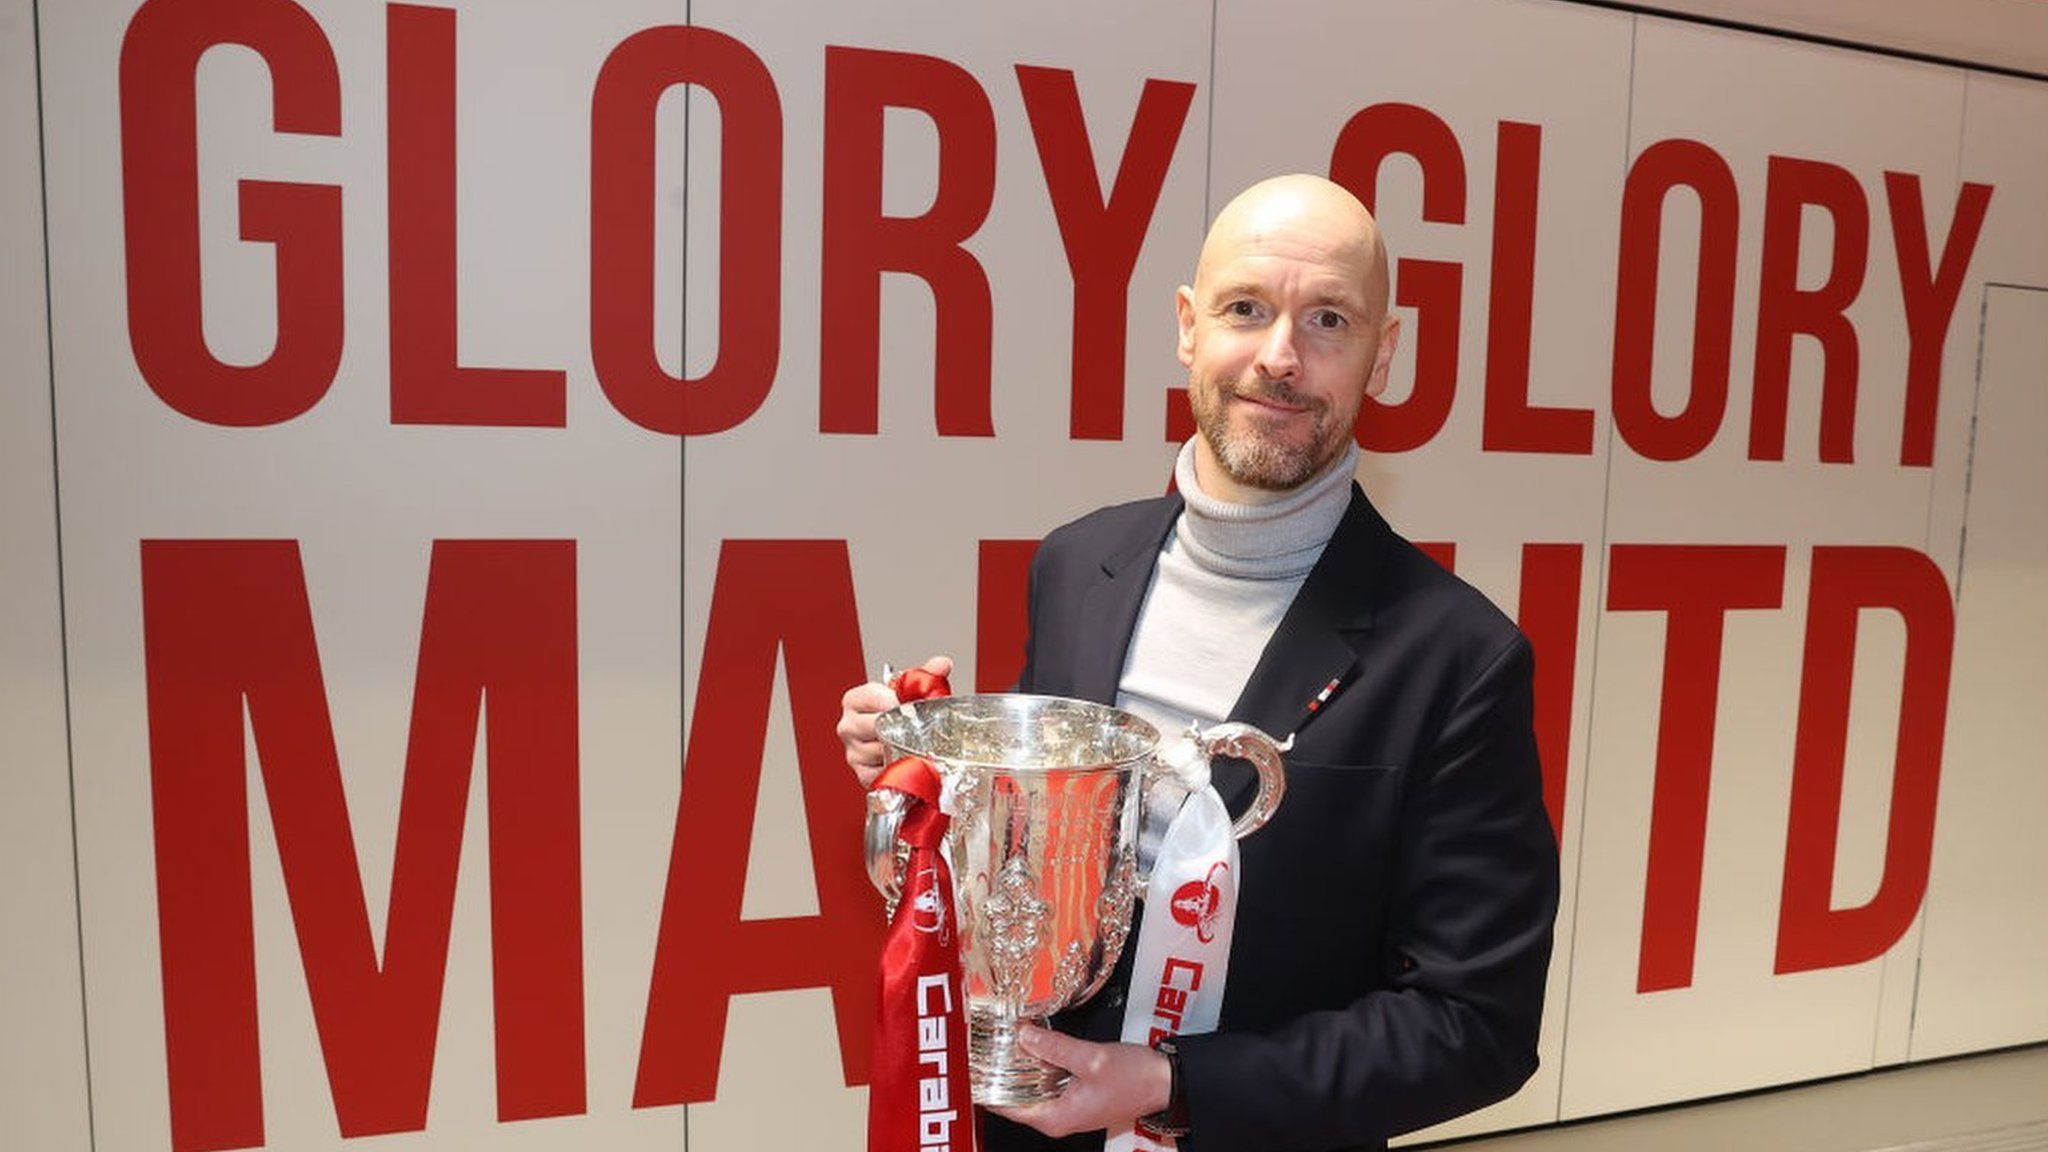 Erik ten Hag arrived at Manchester United in the summer and has already landed their first major trophy, with the Europa League, FA Cup and Premier League still to play for.